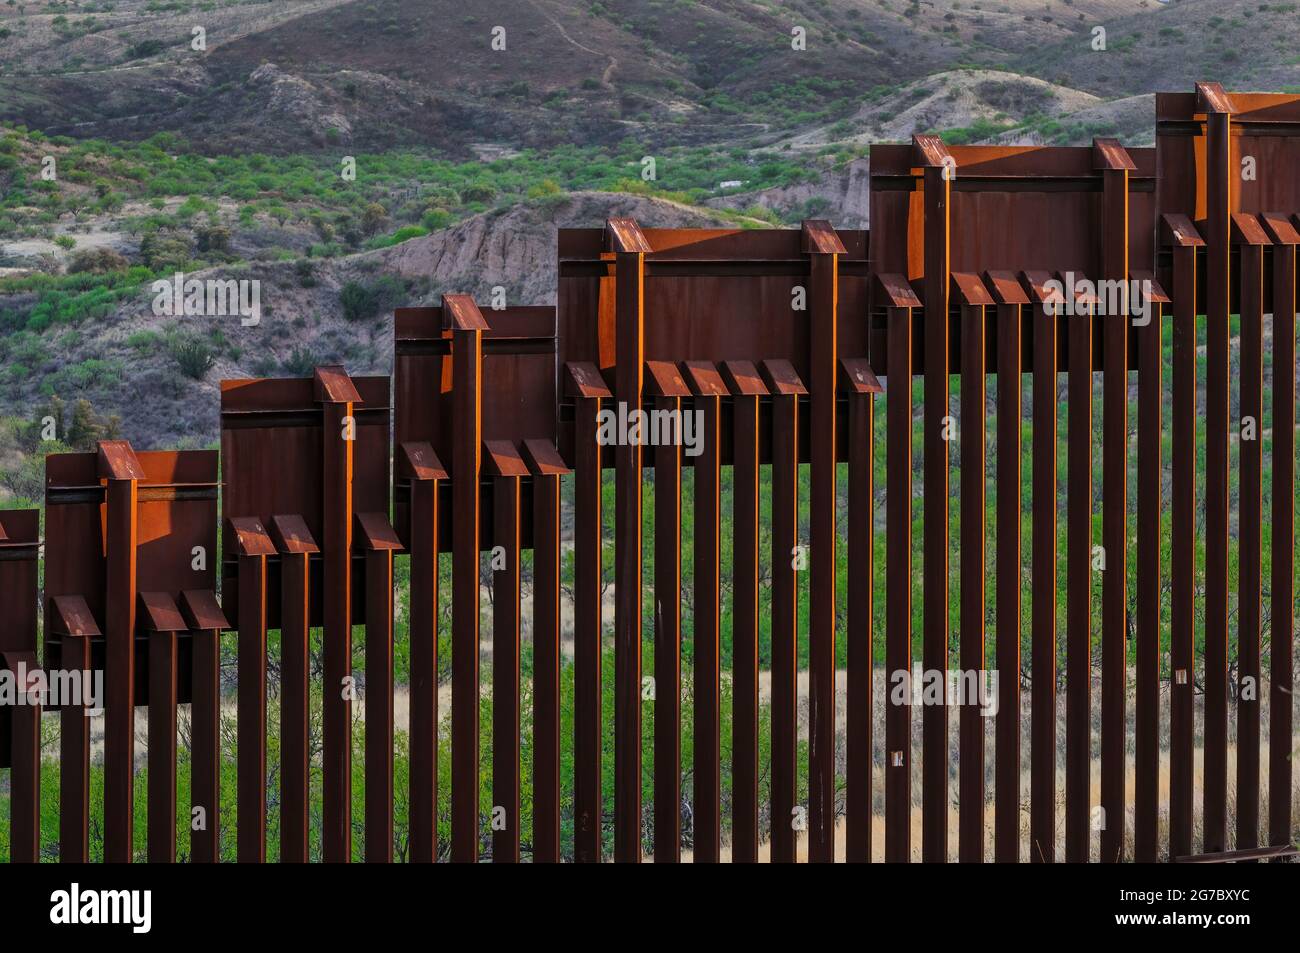 Detail view of top of US border fence on the Mexico border, east of Nogales Arizona USA and Nogales Sonora Mexico, viewed from US side. This type of b Stock Photo